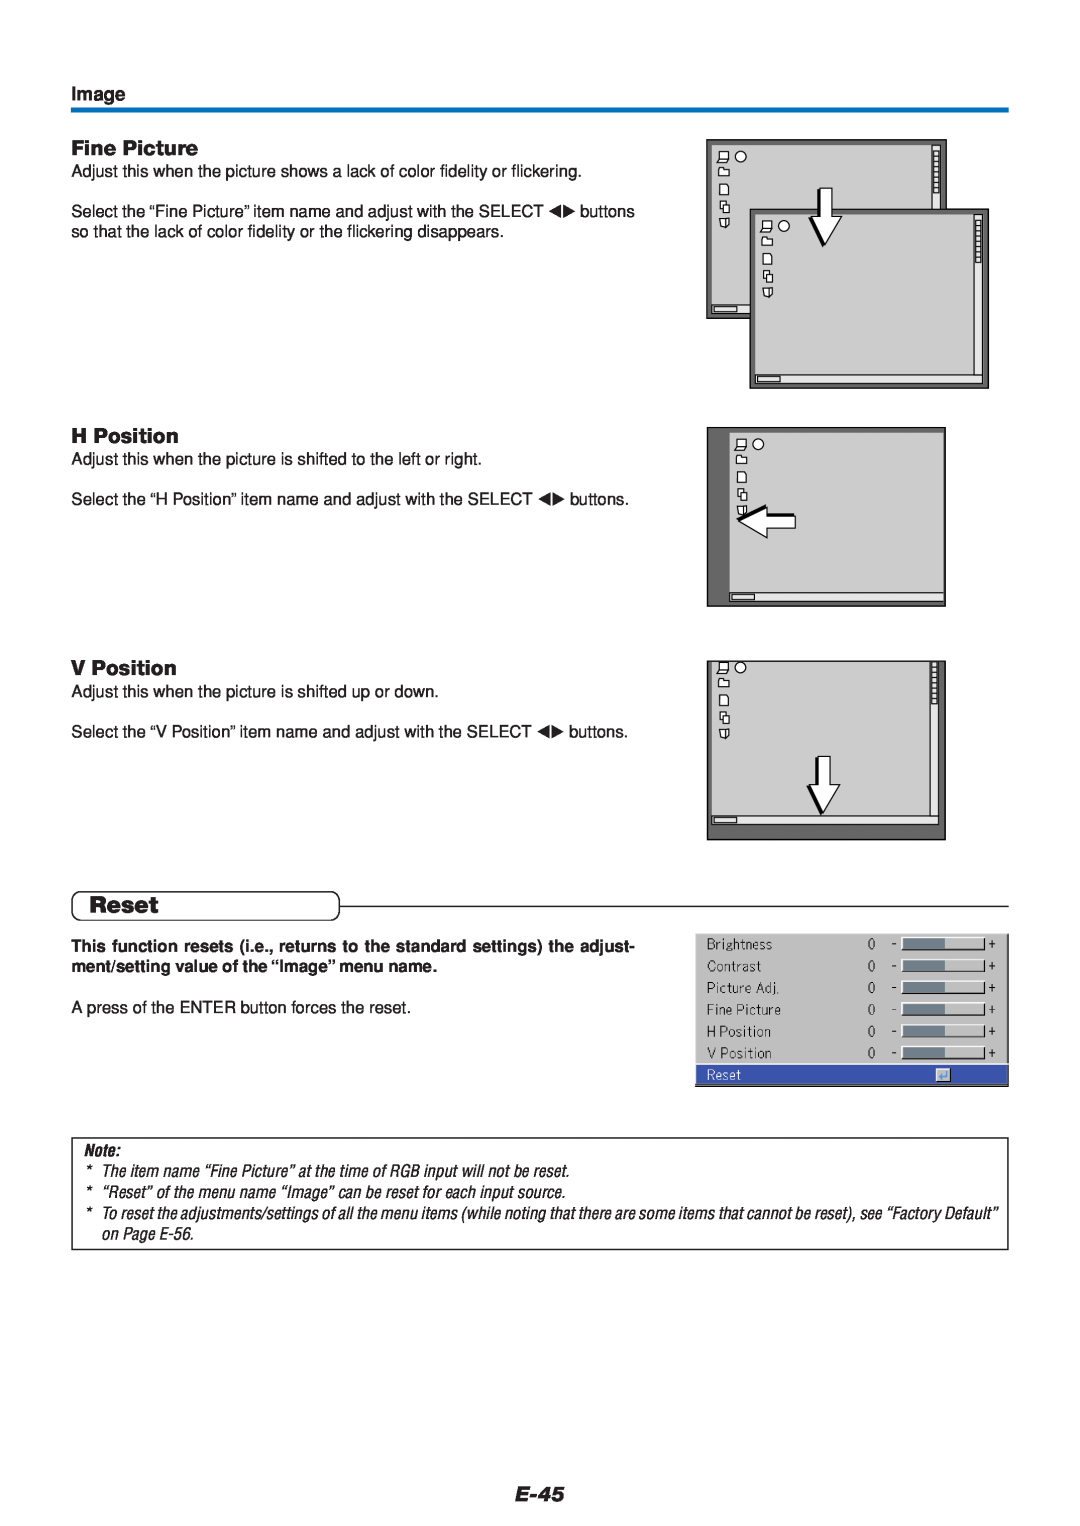 Mitsubishi Electronics DATA PROJECTOR user manual Reset, Fine Picture, H Position, V Position, E-45, Image 